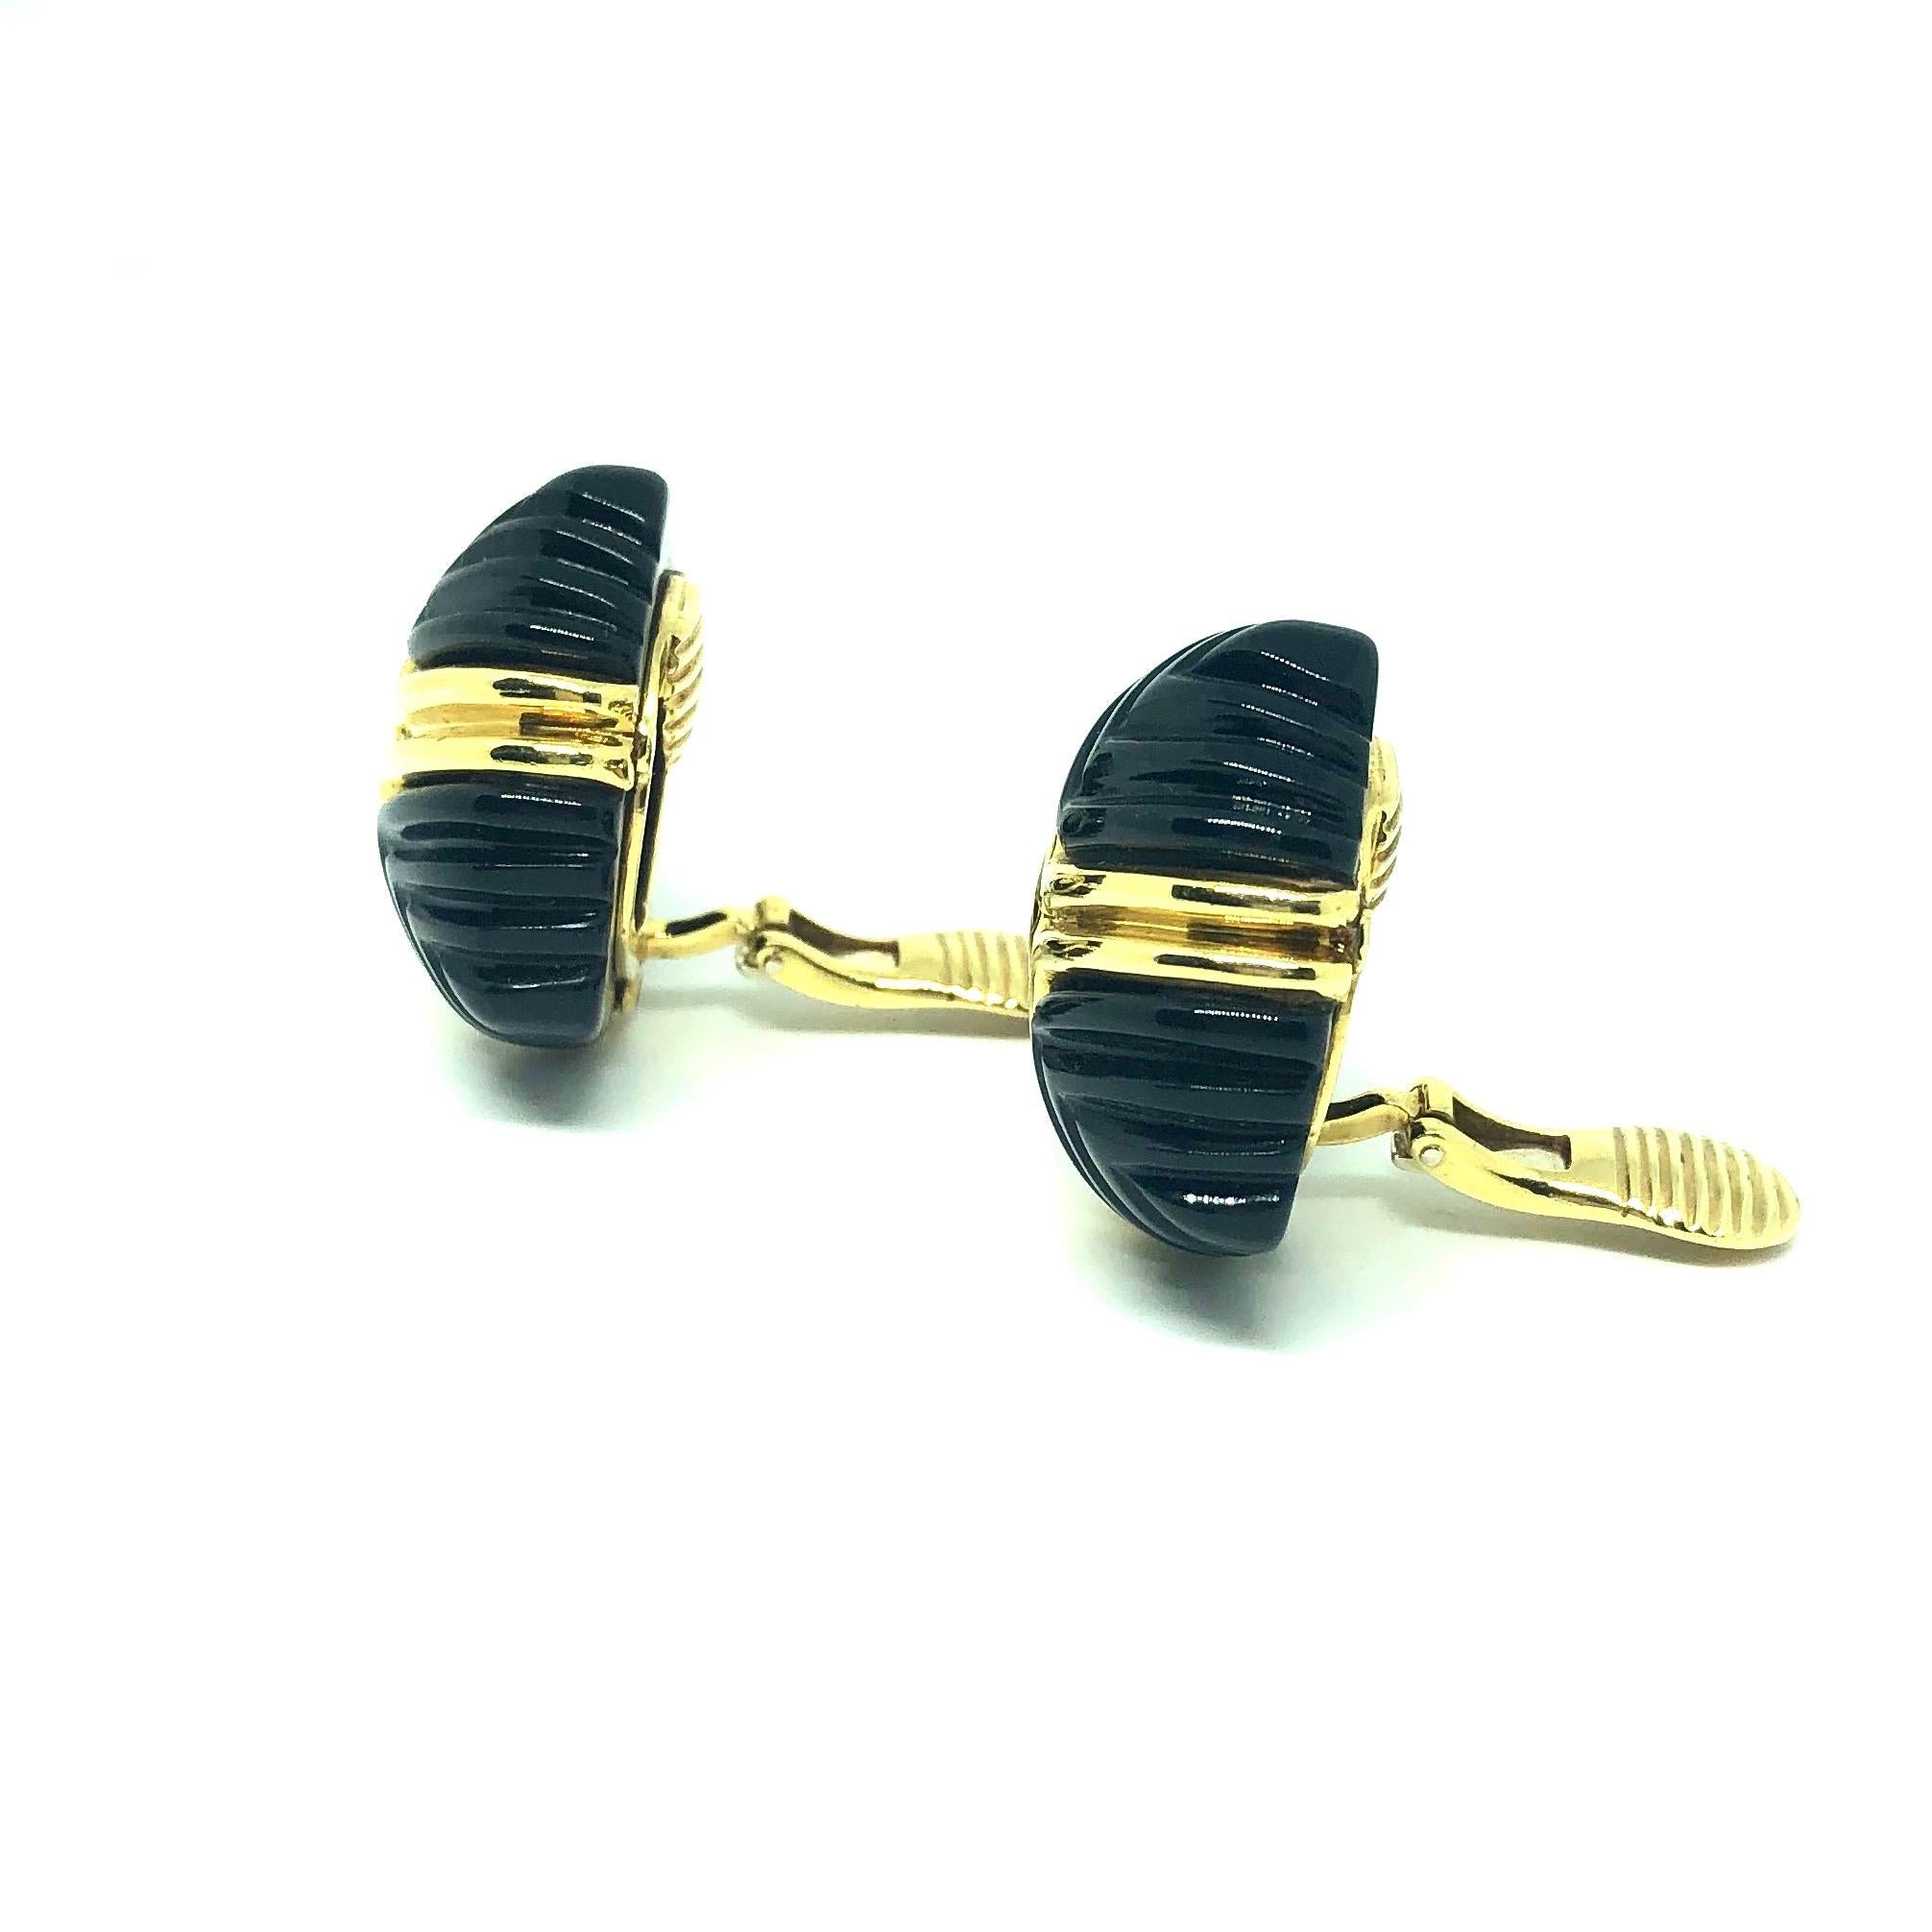 Large carved black onyx and 18K yellow gold clip-on earrings with a domed stylized chevron design. 
Each earring measures: 1 inch W x 1 1/16 inch H x 9/16 inch D
Weight: 30.4 grams
